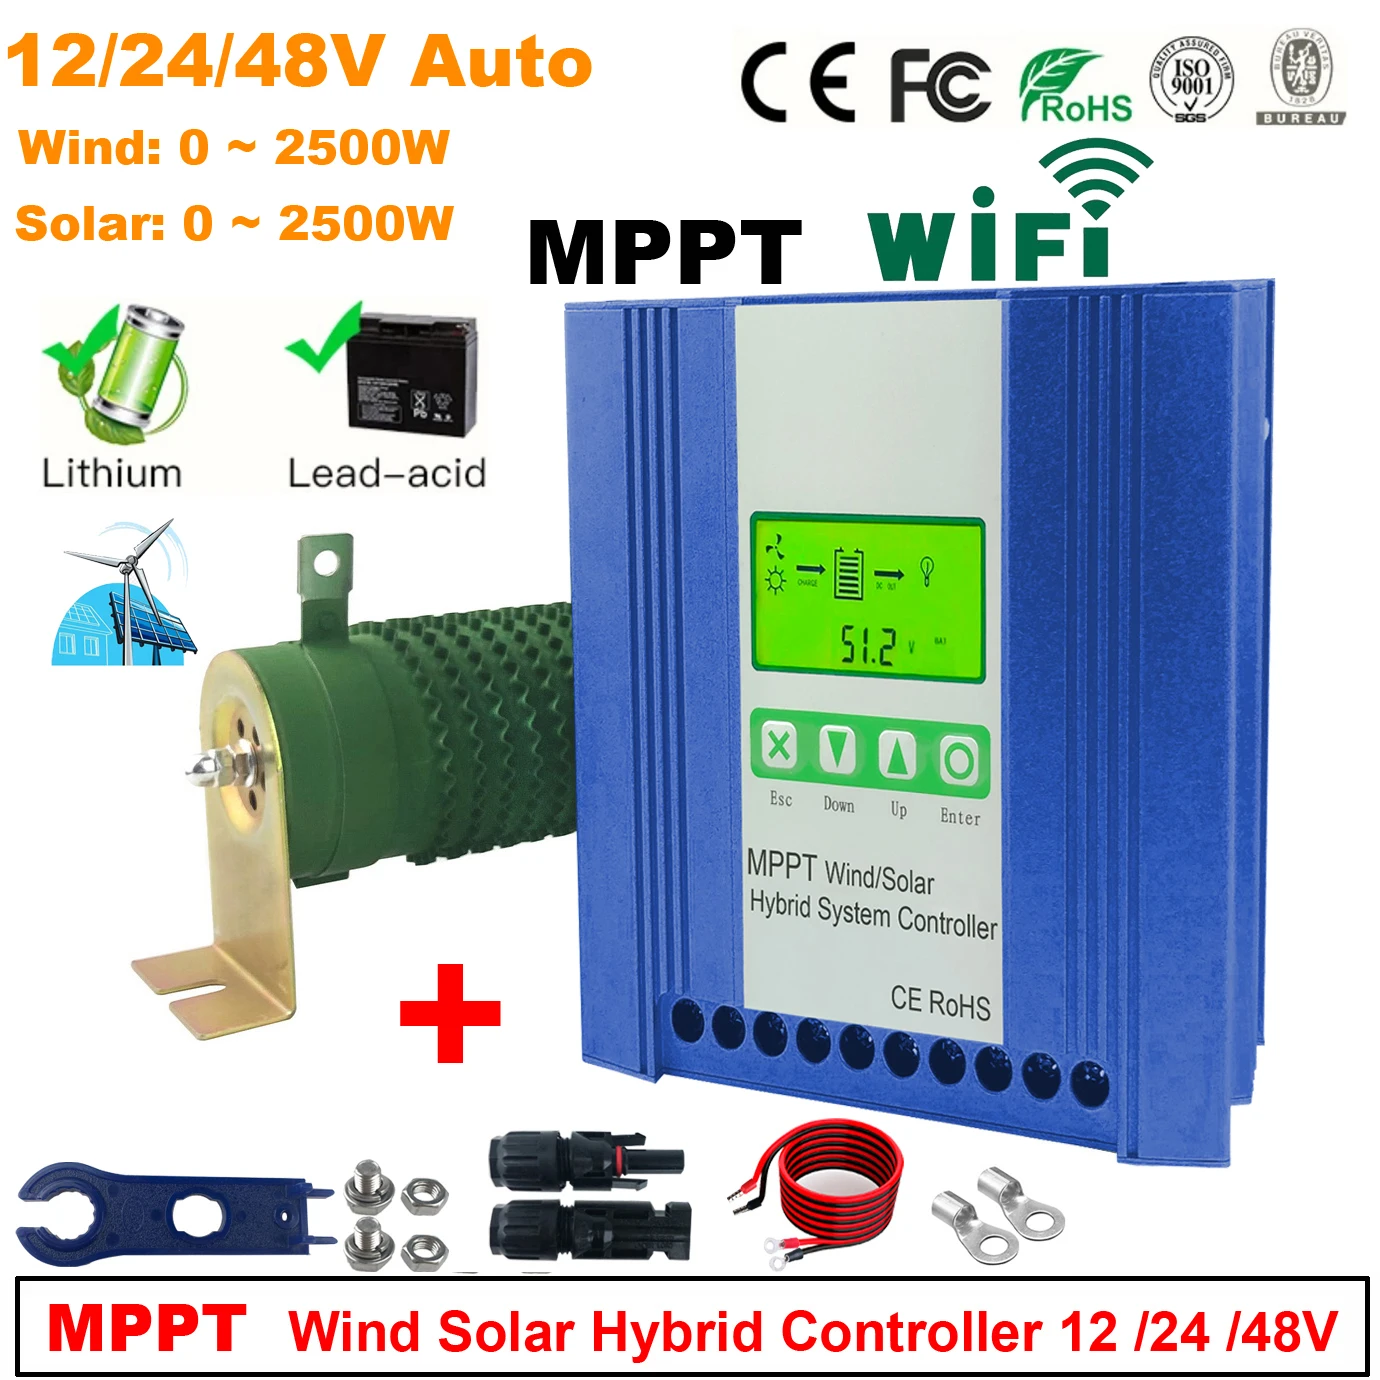 

big 5000W Wind Solar Hybrid Charge Controller, 12V 24V 48V AUTO Match, MPPT Charge for Solar Panel Wind Turbine, for Lithium Lea